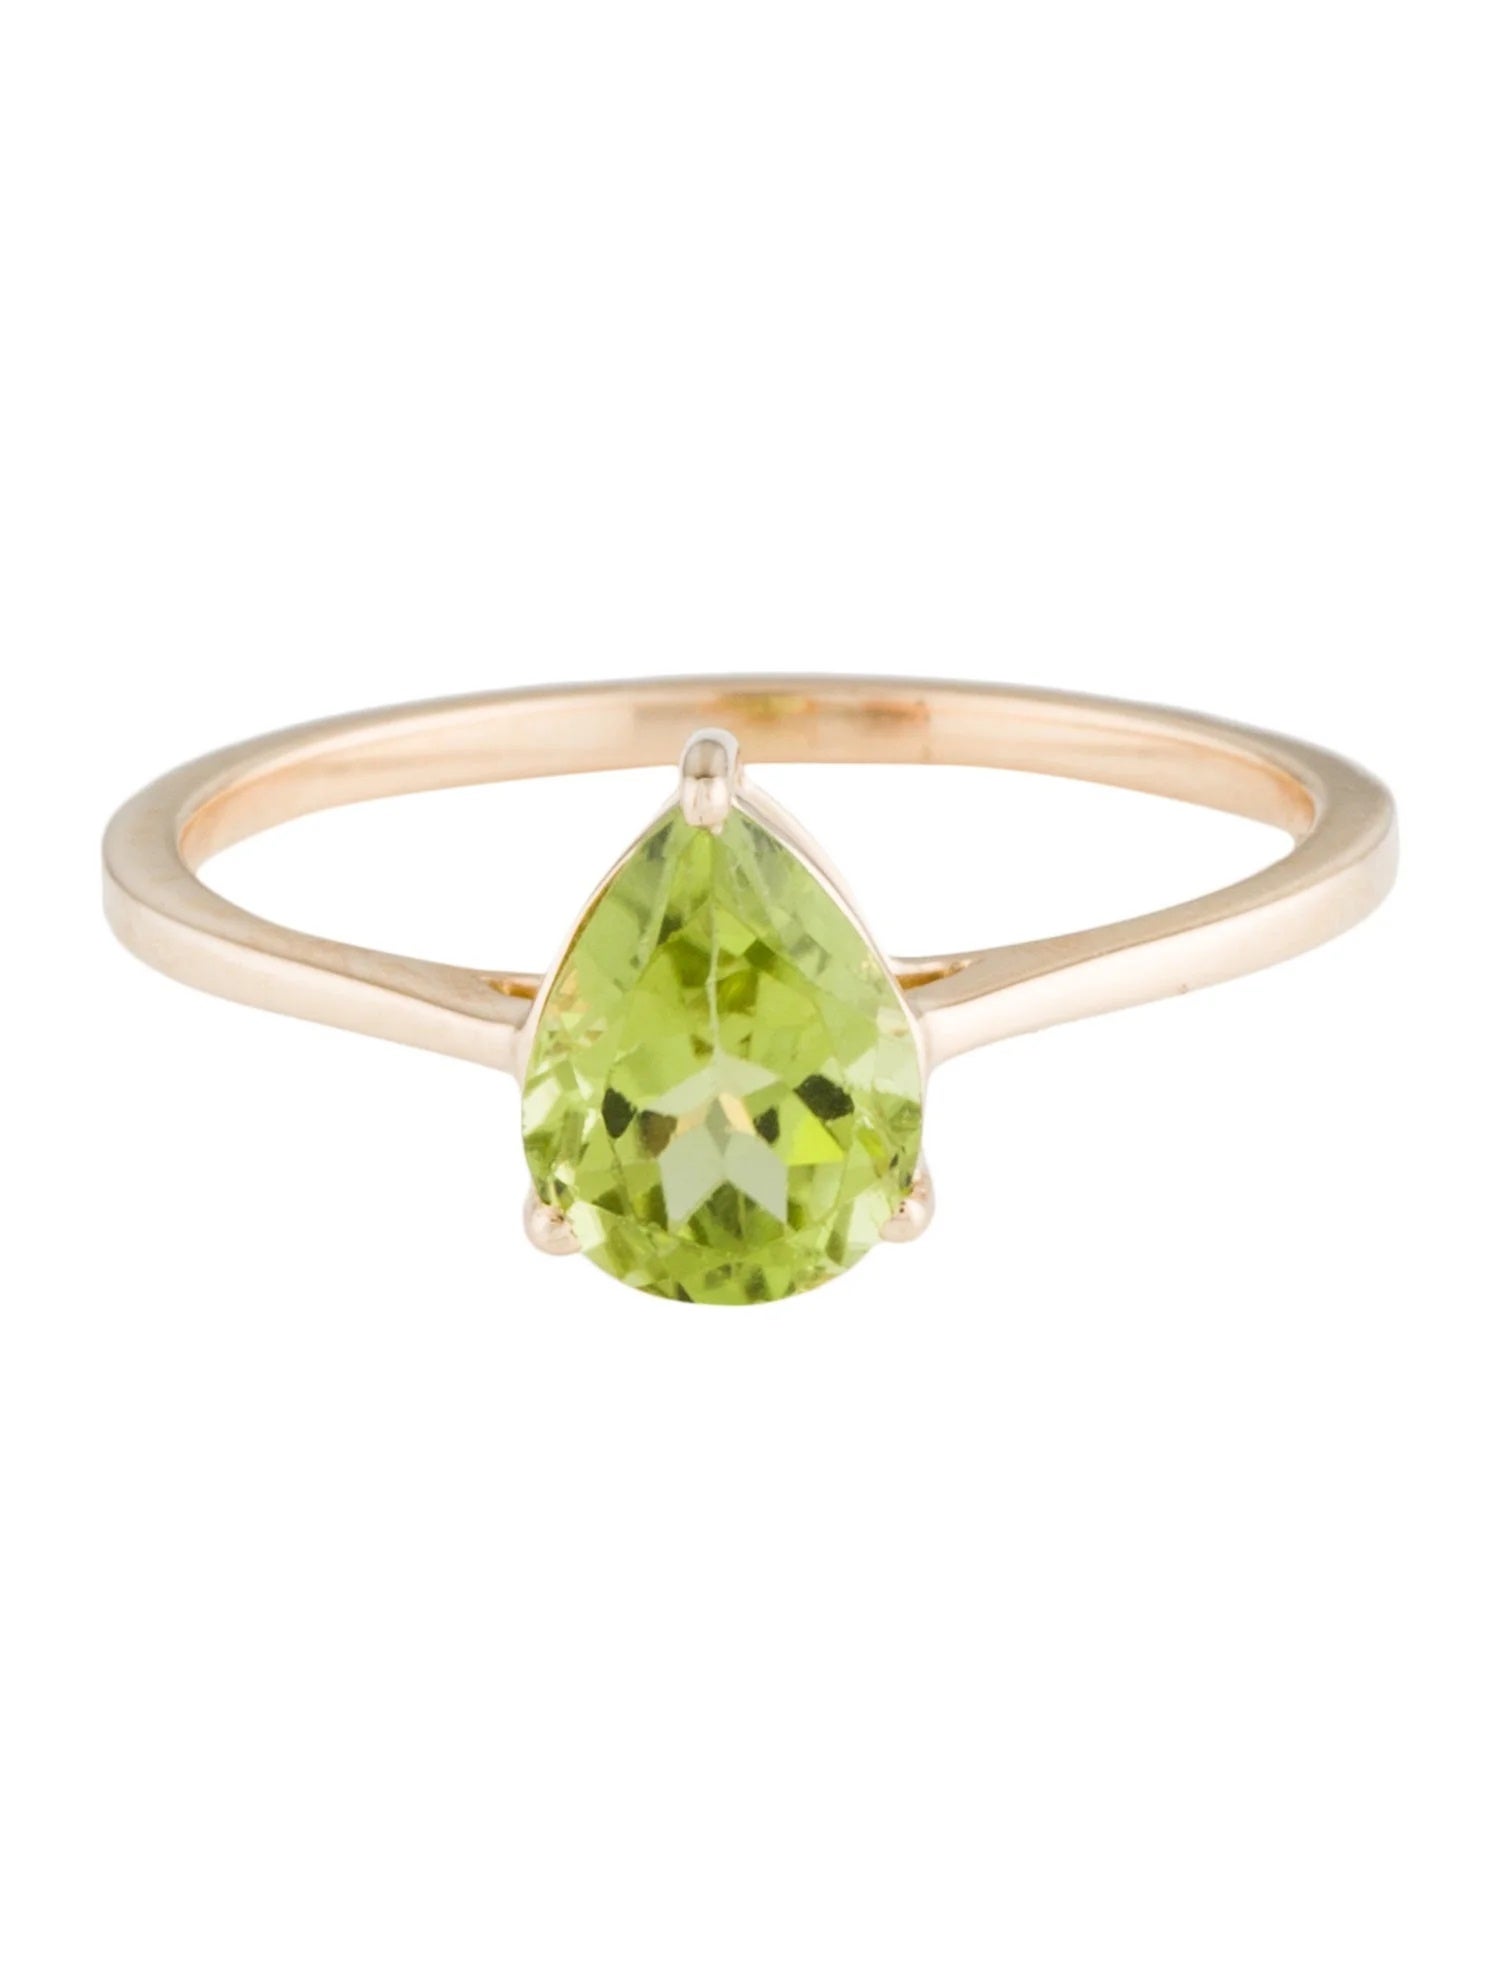 14K Yellow Gold Peridot Cocktail Ring - Pear Modified Brilliant Design